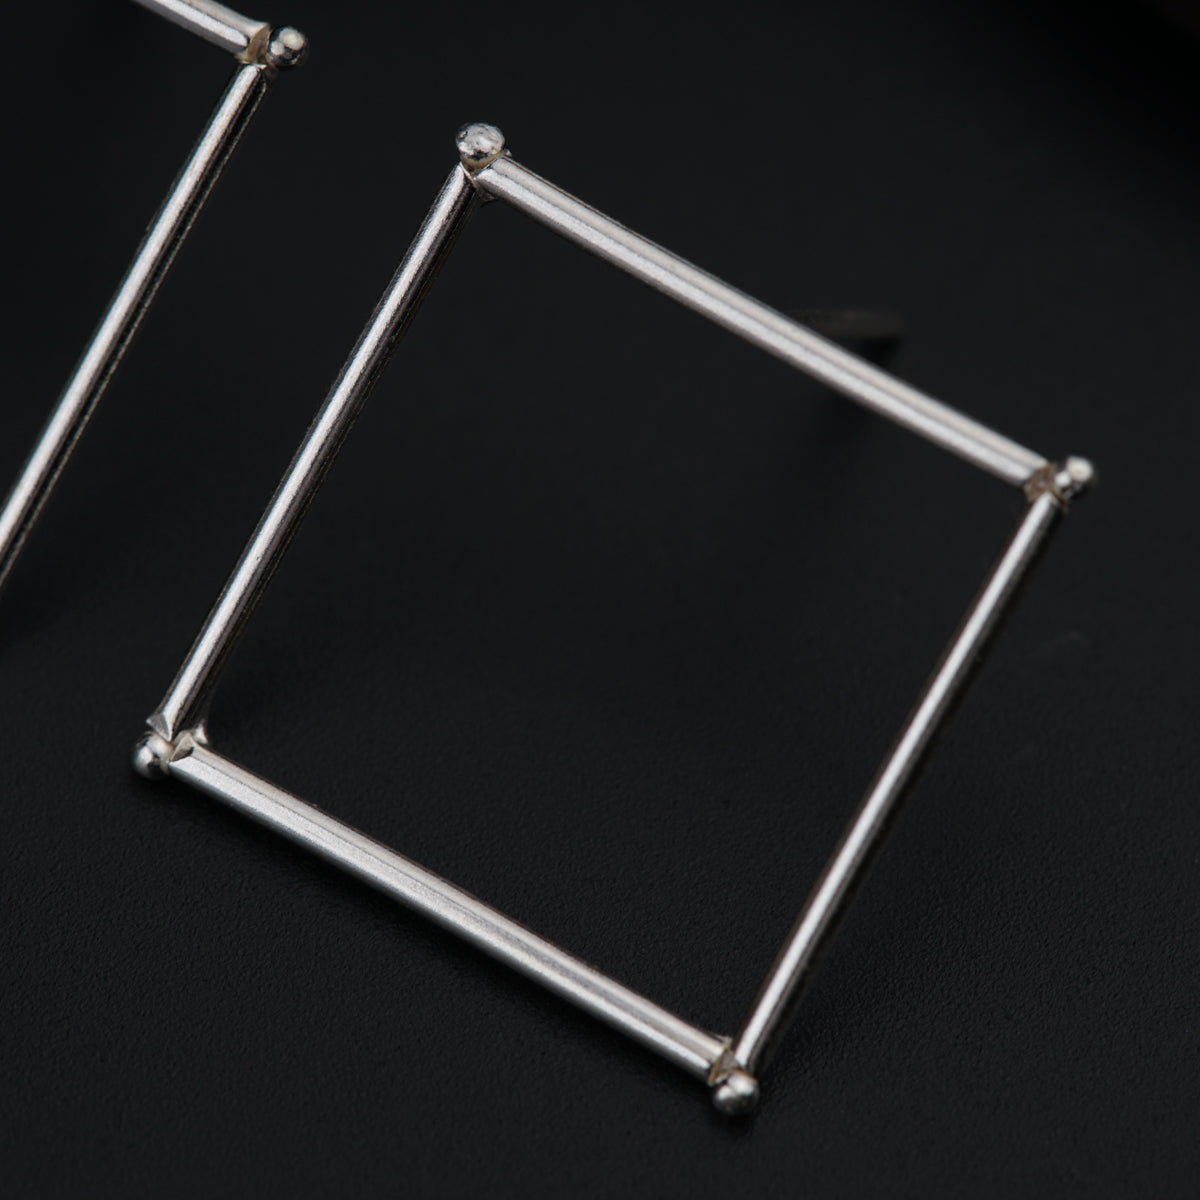 a pair of square silver earrings on a black surface